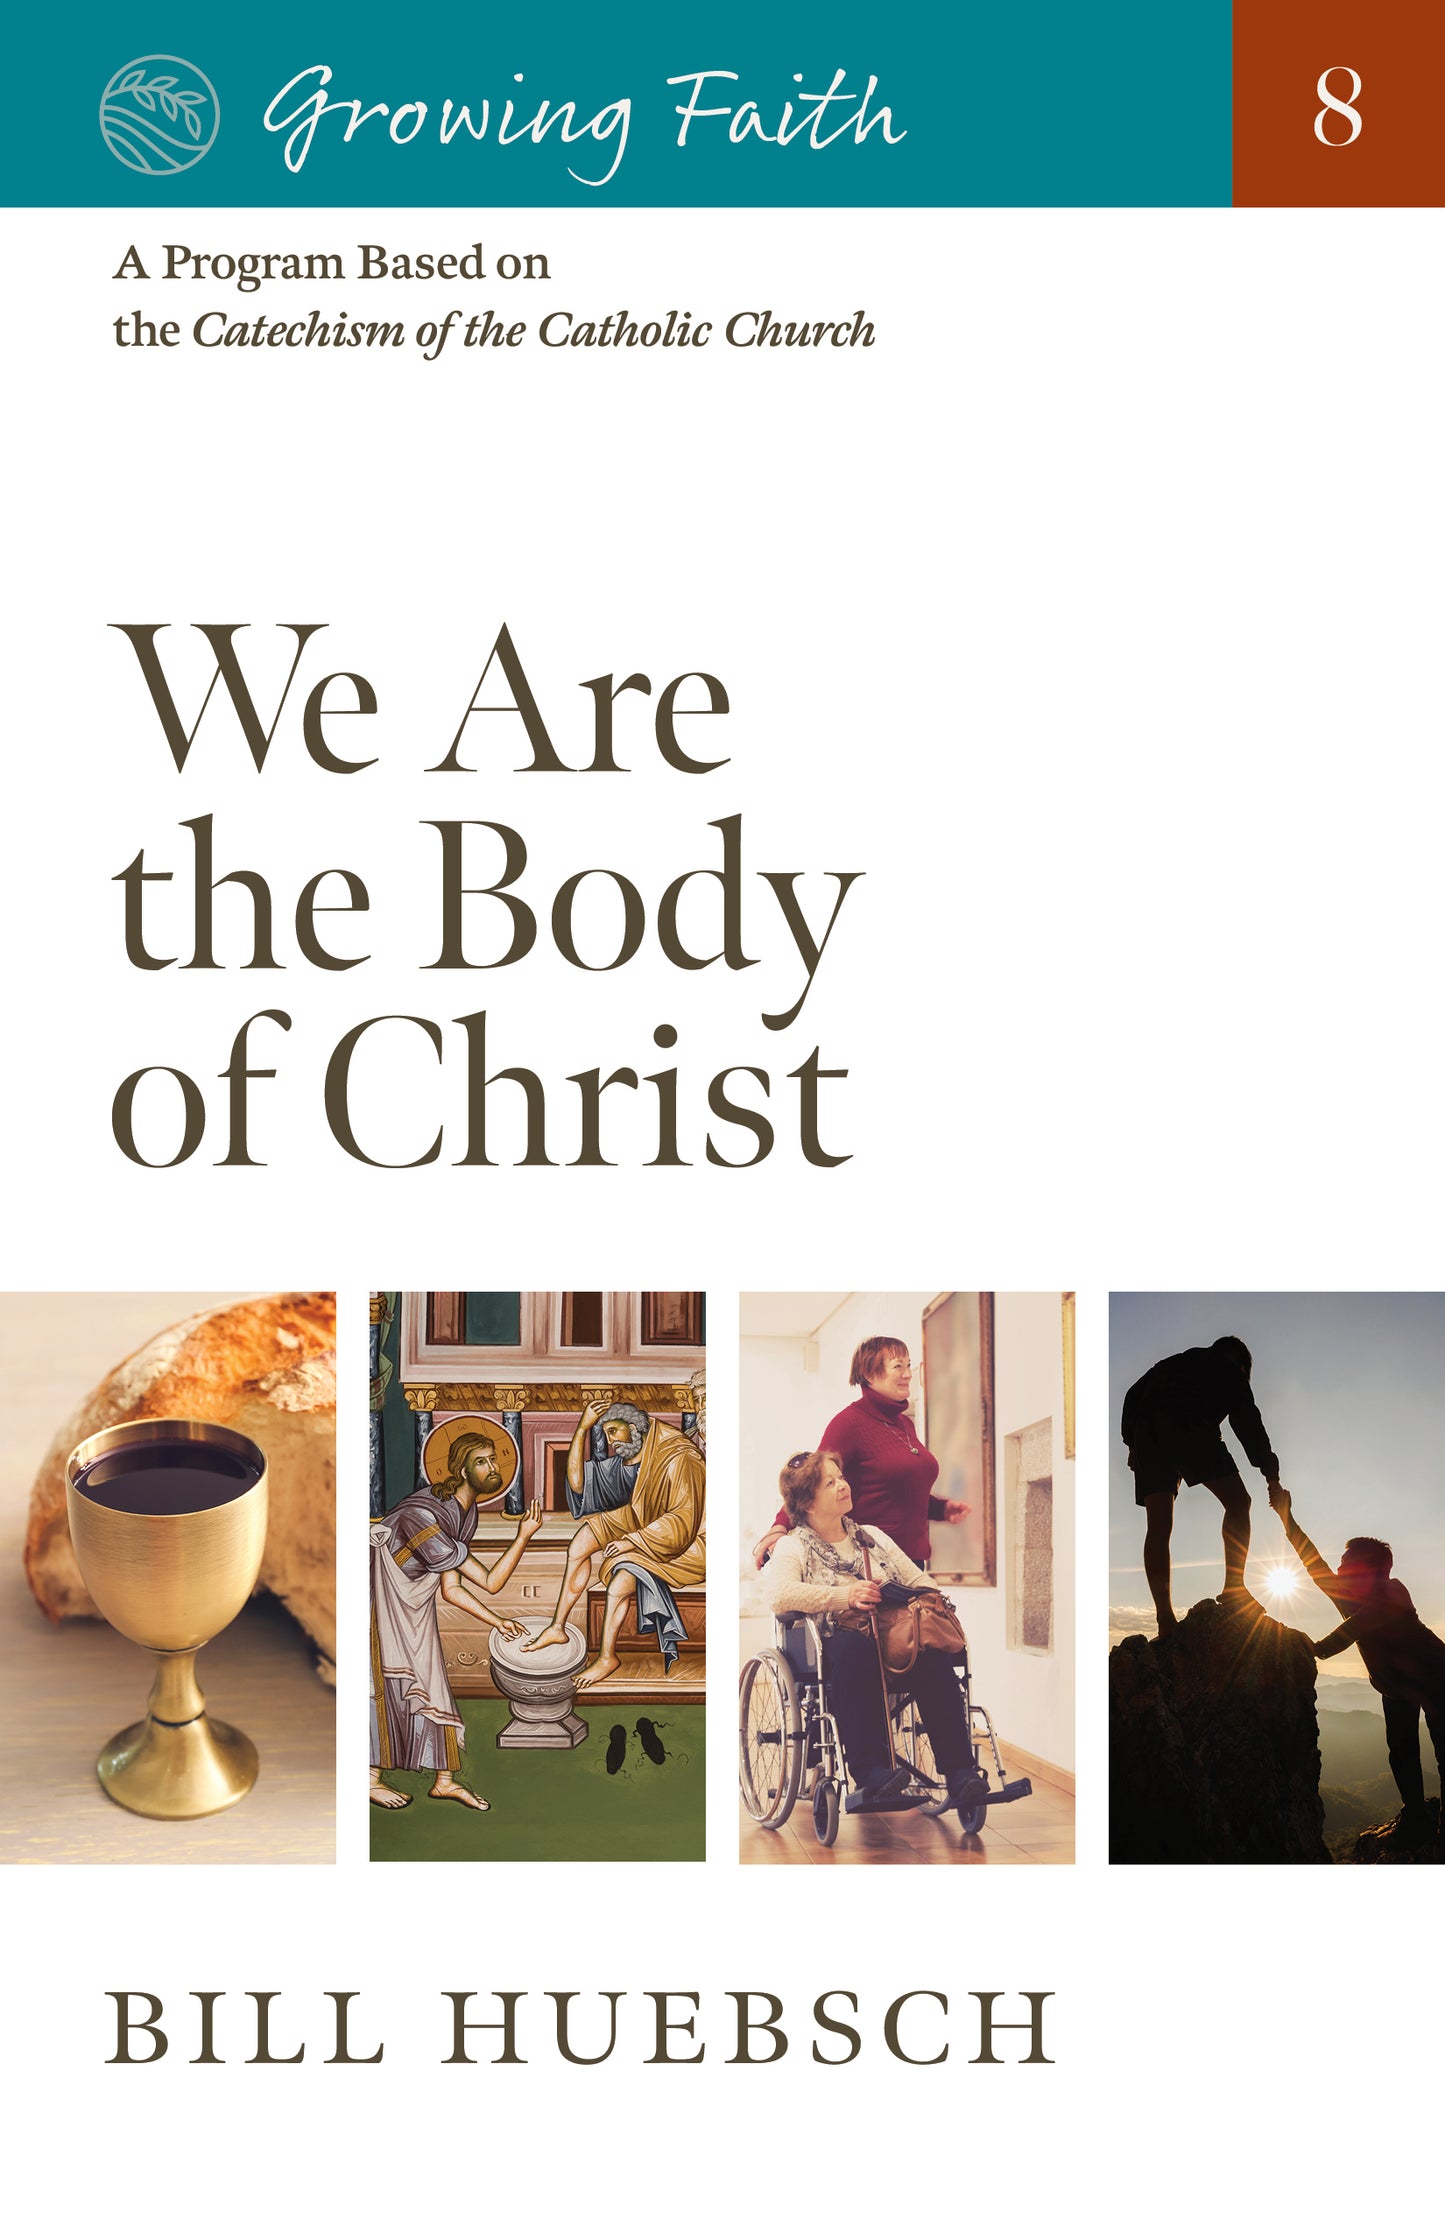 Growing Faith: We Are the Body of Christ